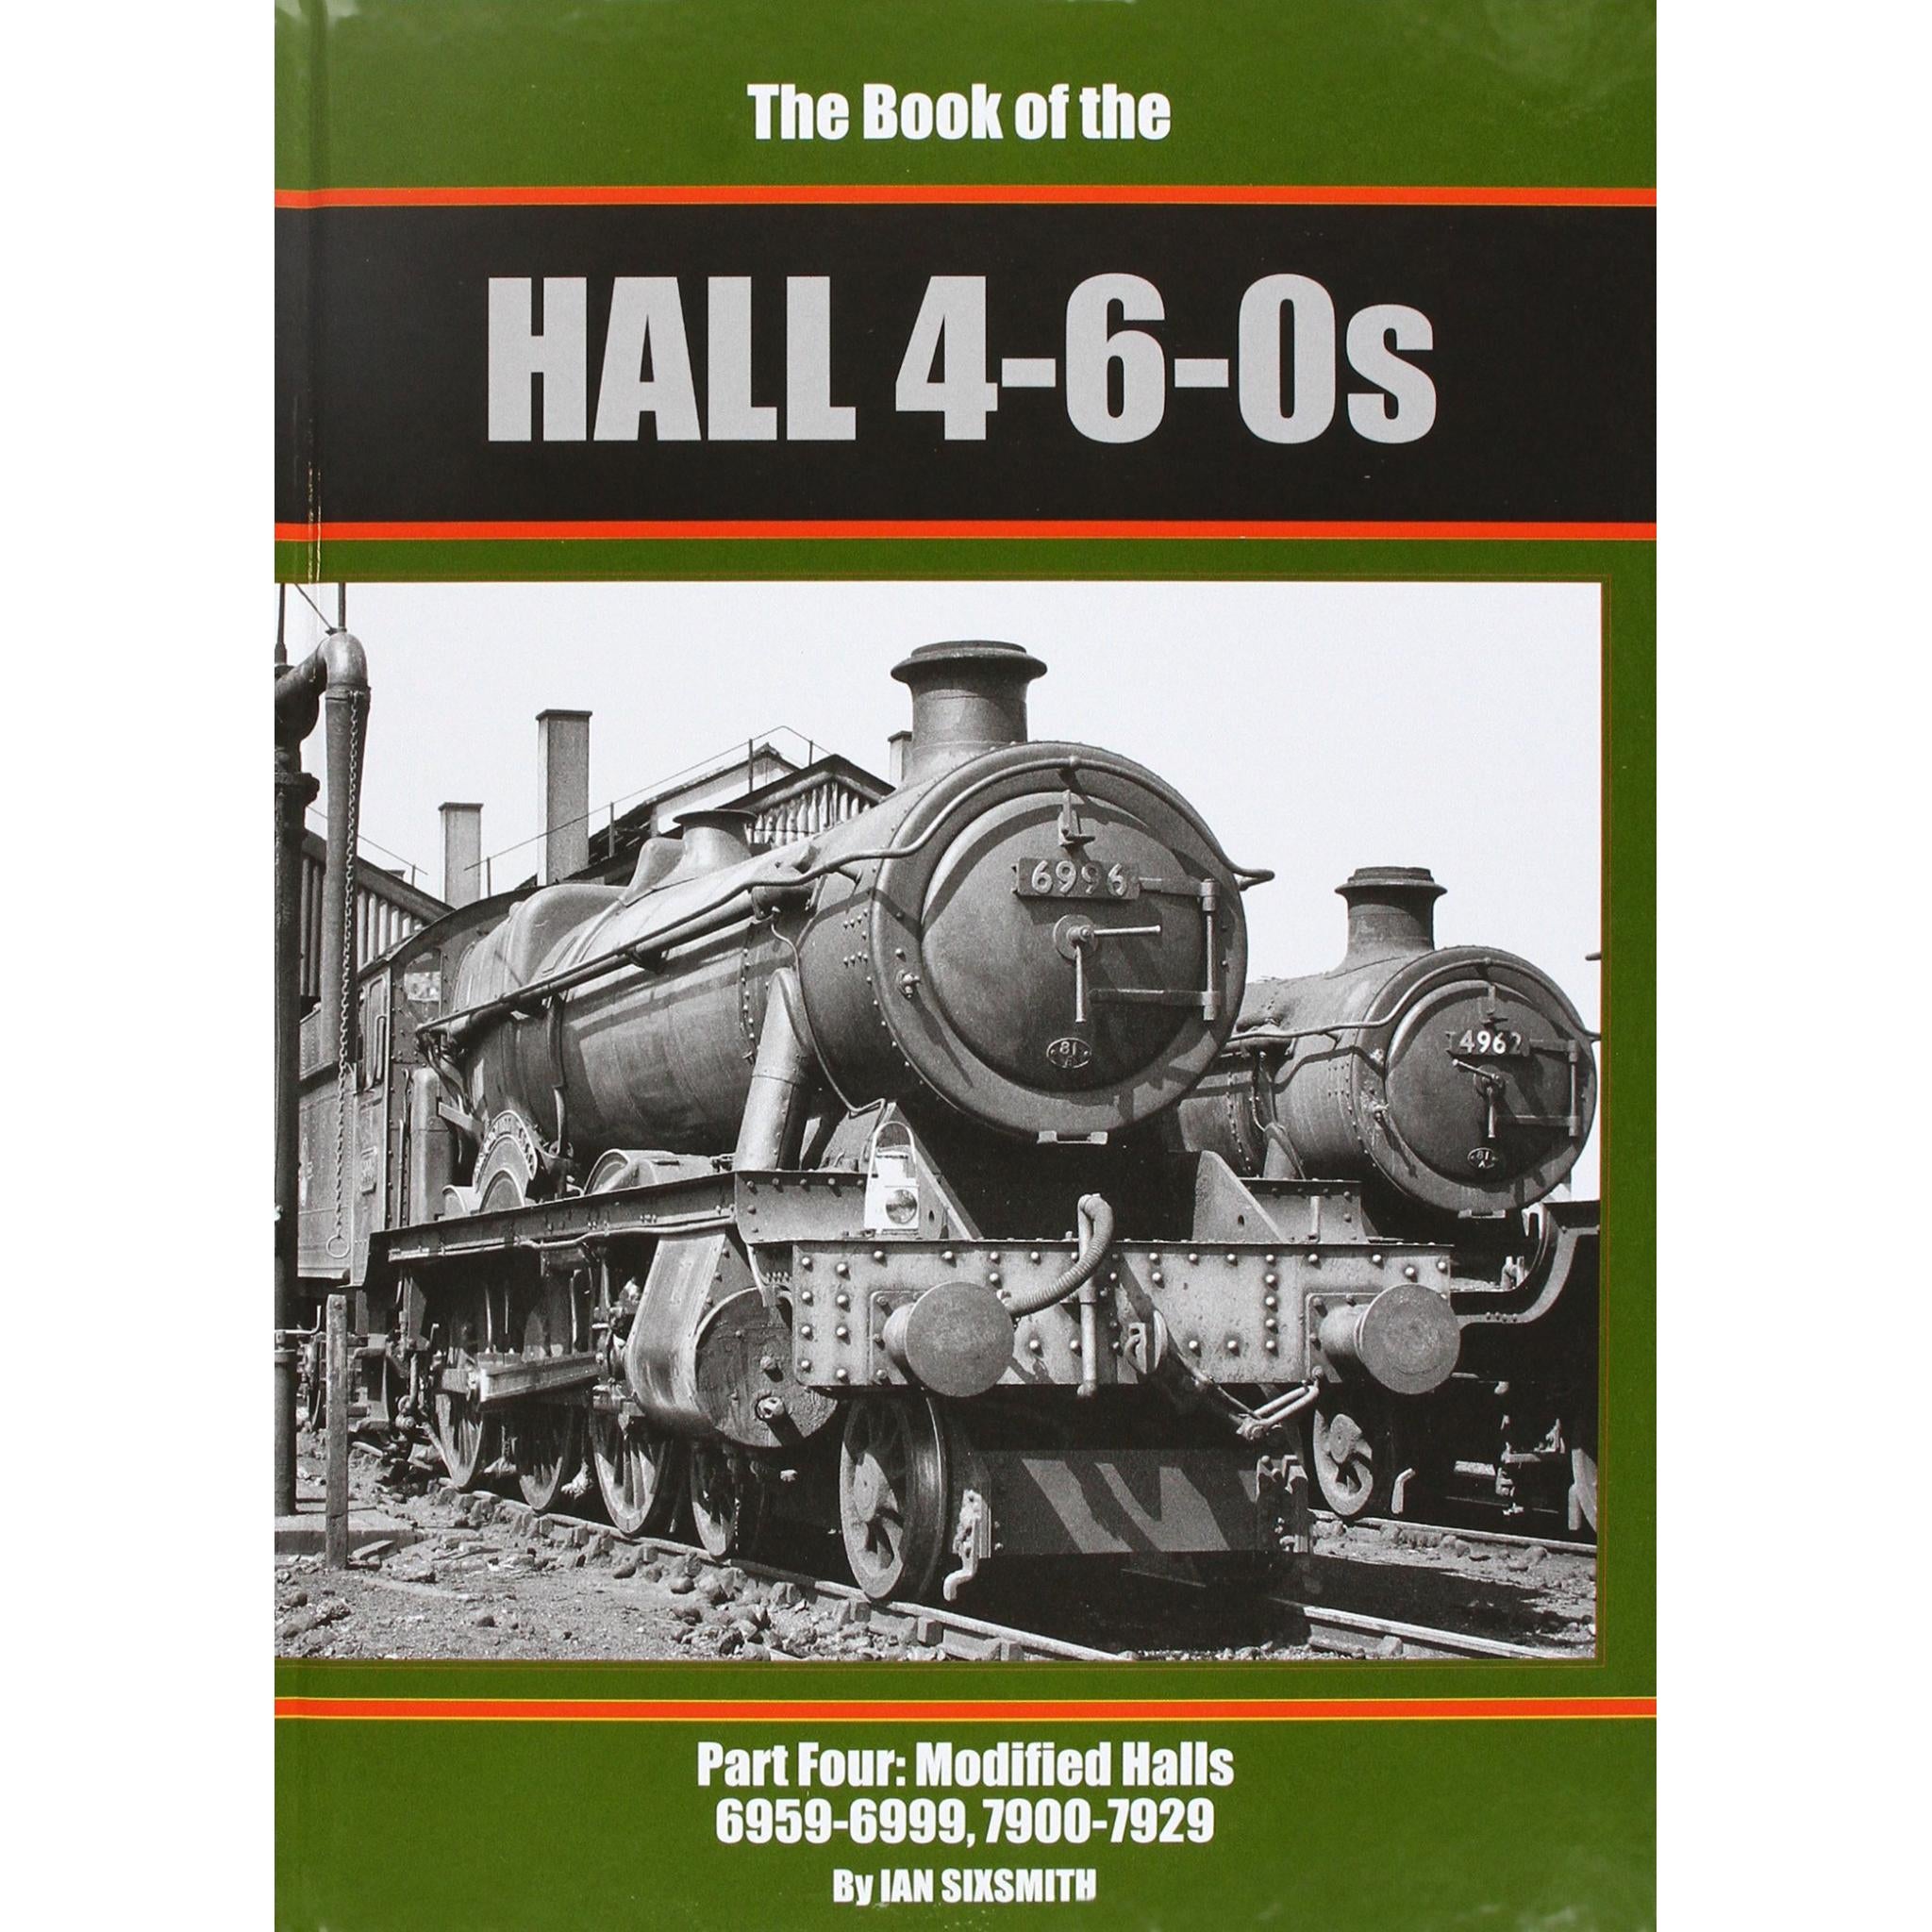 FLASH SALE 50%+ OFF RRP is £24.95 The Book of the HALL 4-6-0s Part 4 6959 - 7929